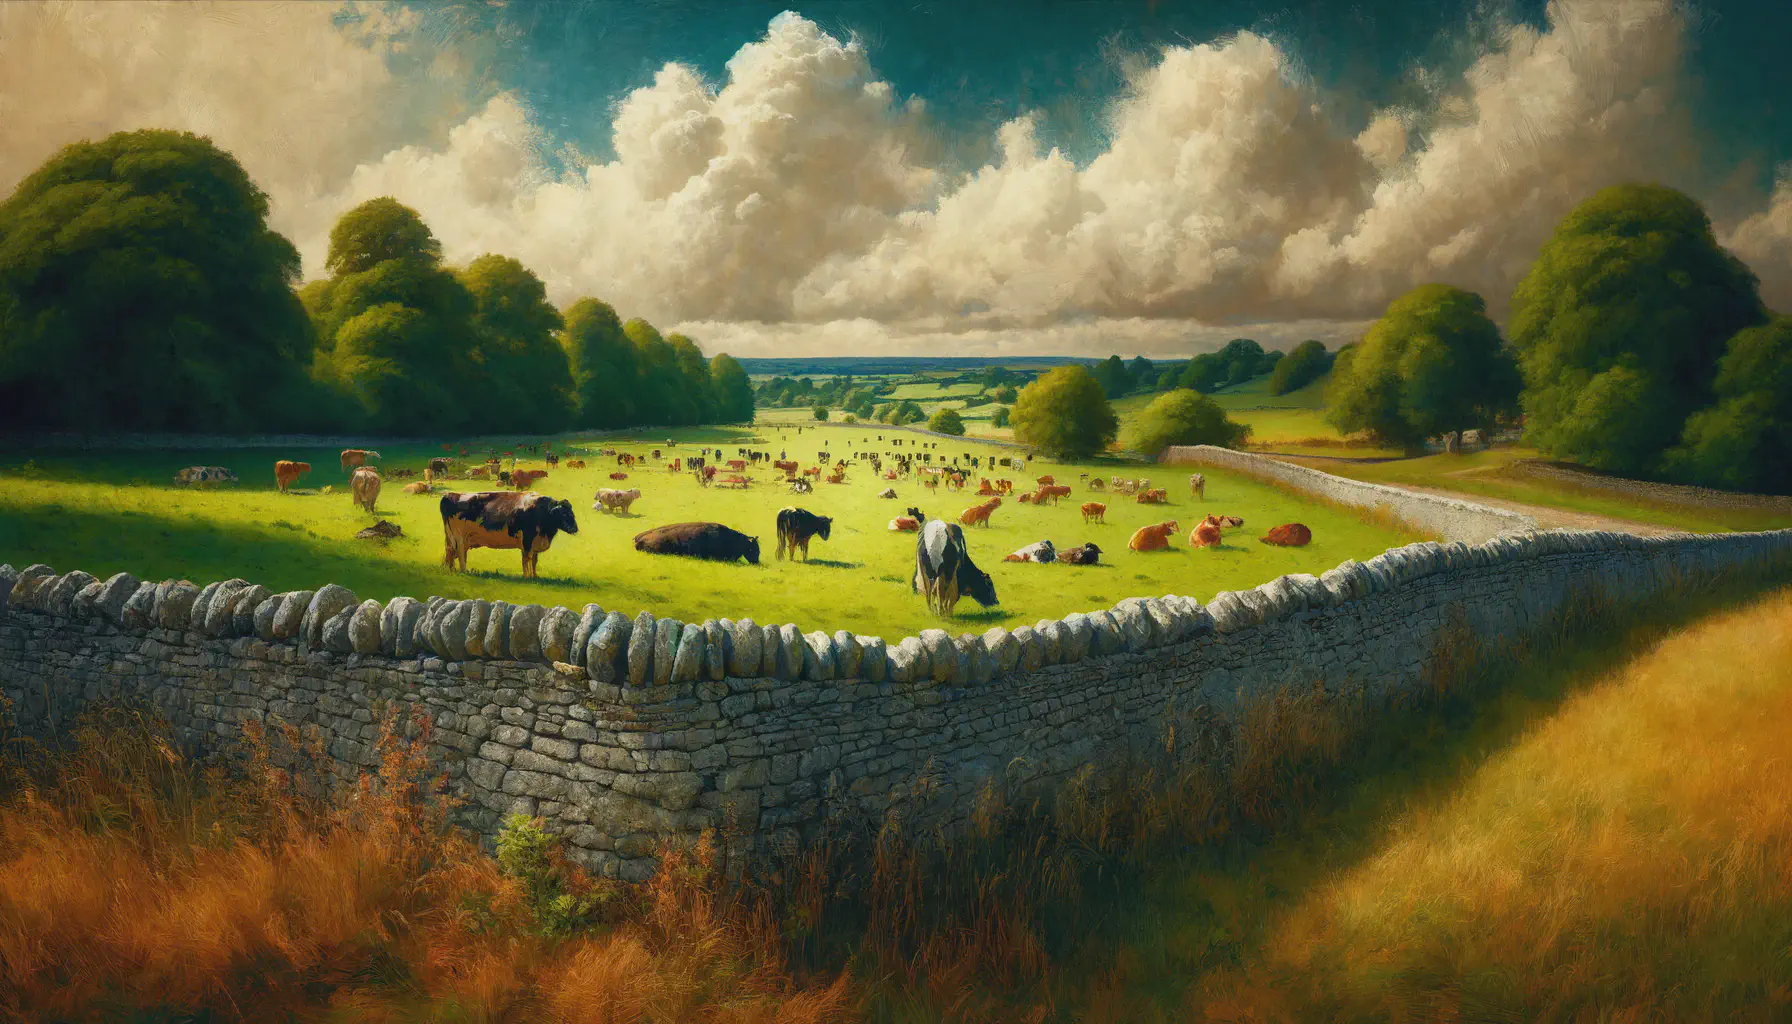 Cows in a field bordered by a dry stone wall. In the style of Joseph Conrad.